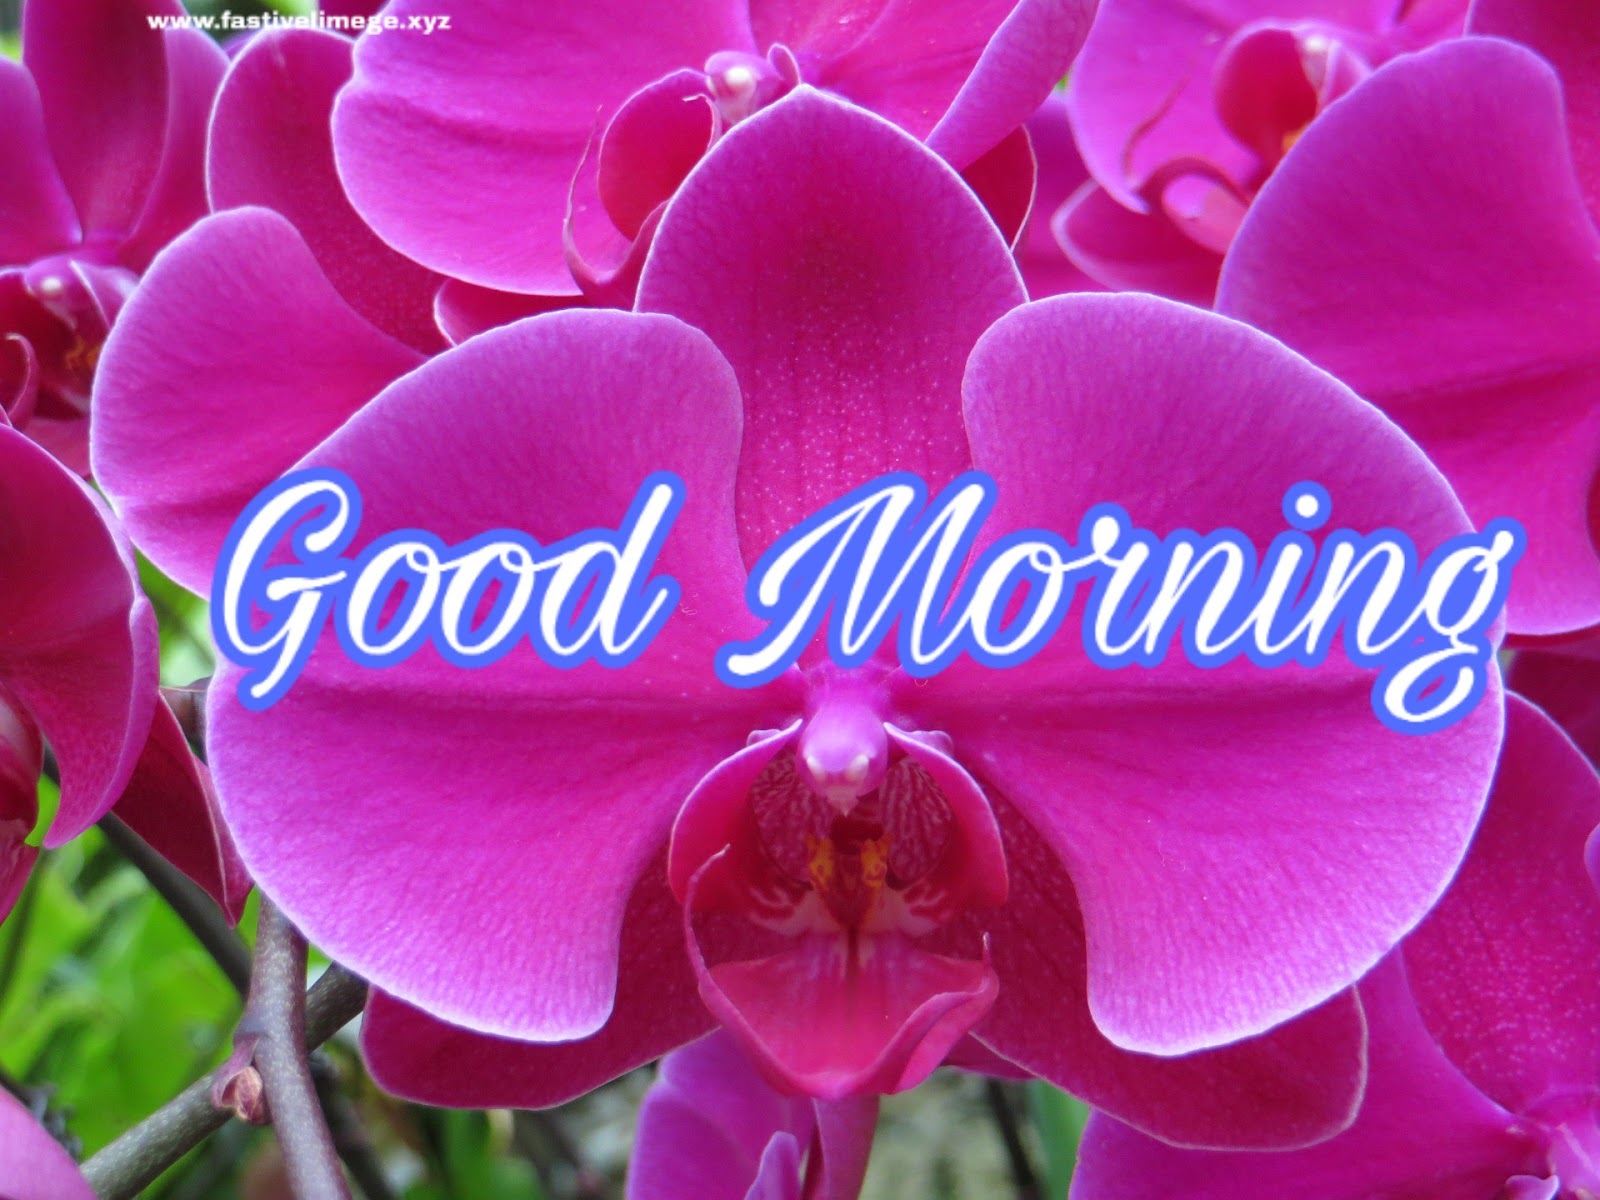 Good Morning Hd Images With Flowers - HD Wallpaper 